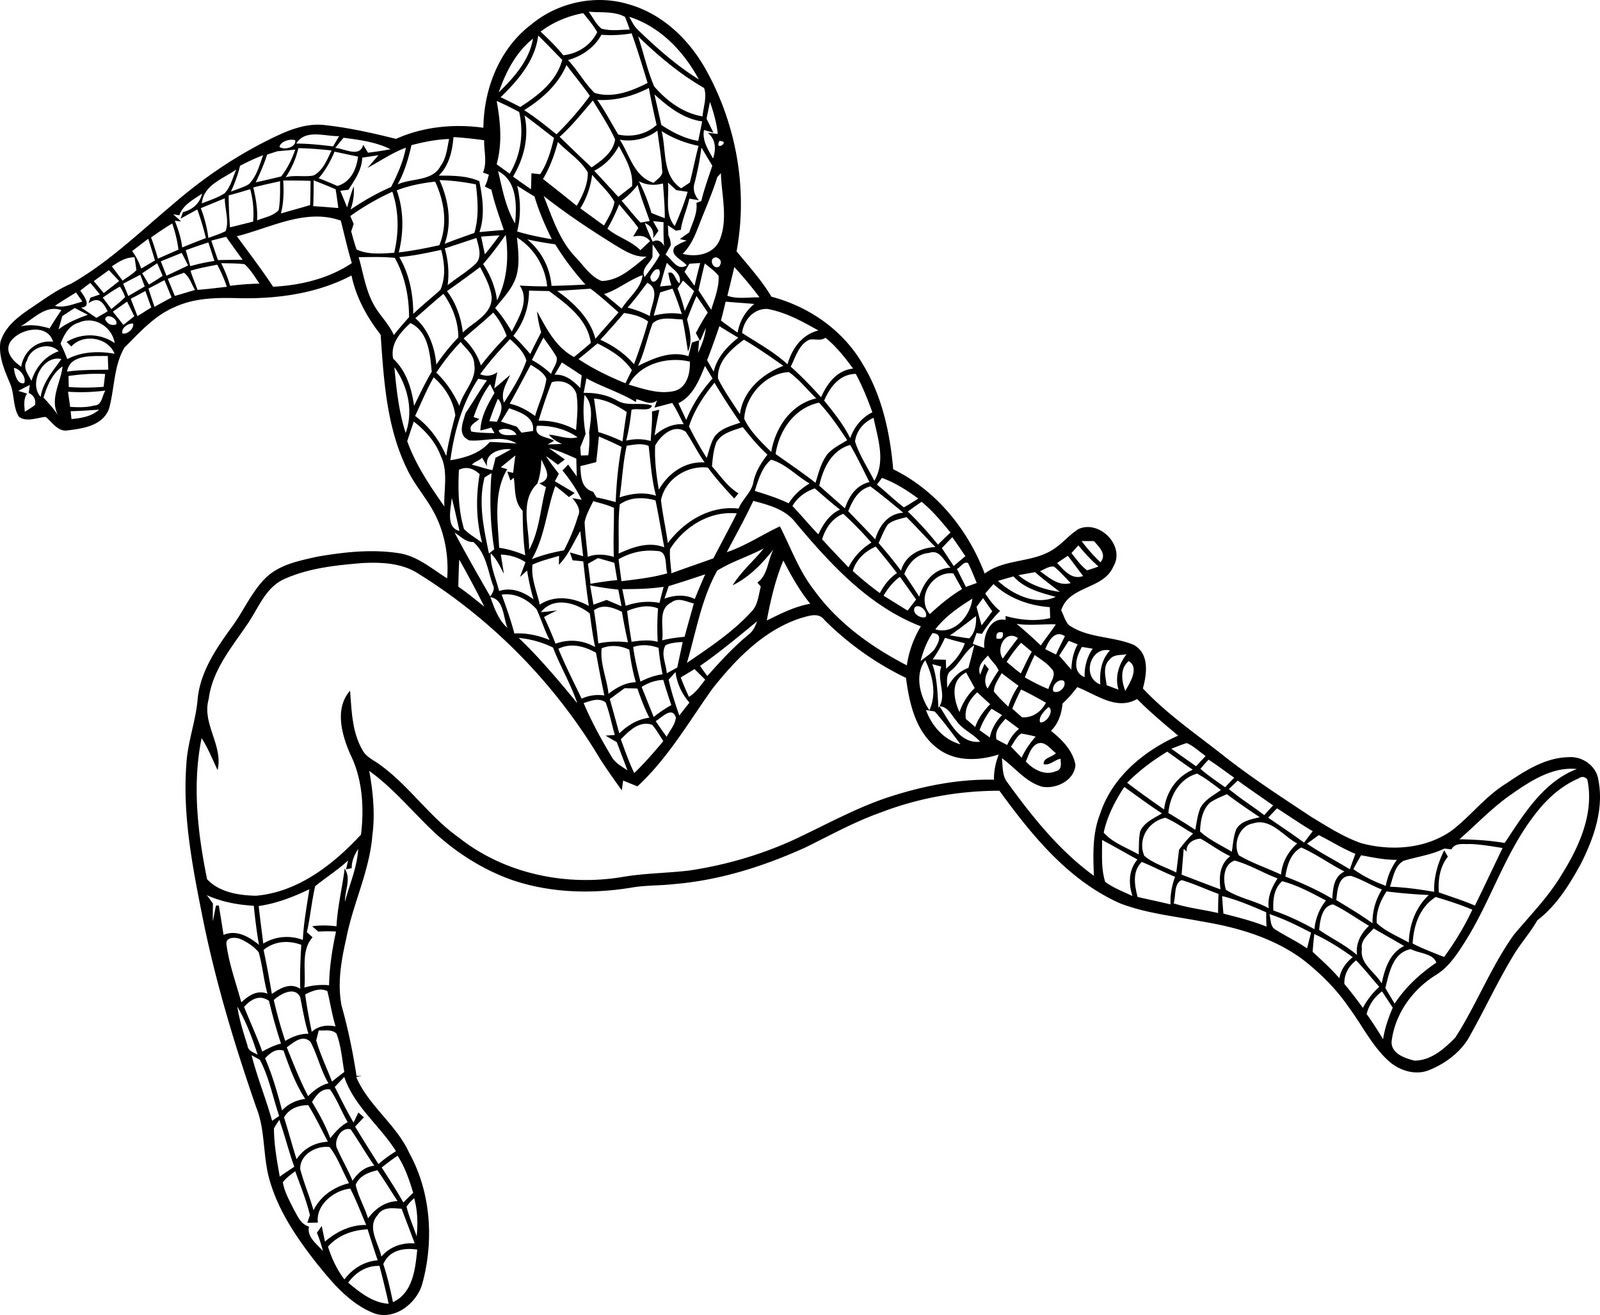 Coloring Pages For Kids Spiderman
 Free Printable Spiderman Coloring Pages For Kids